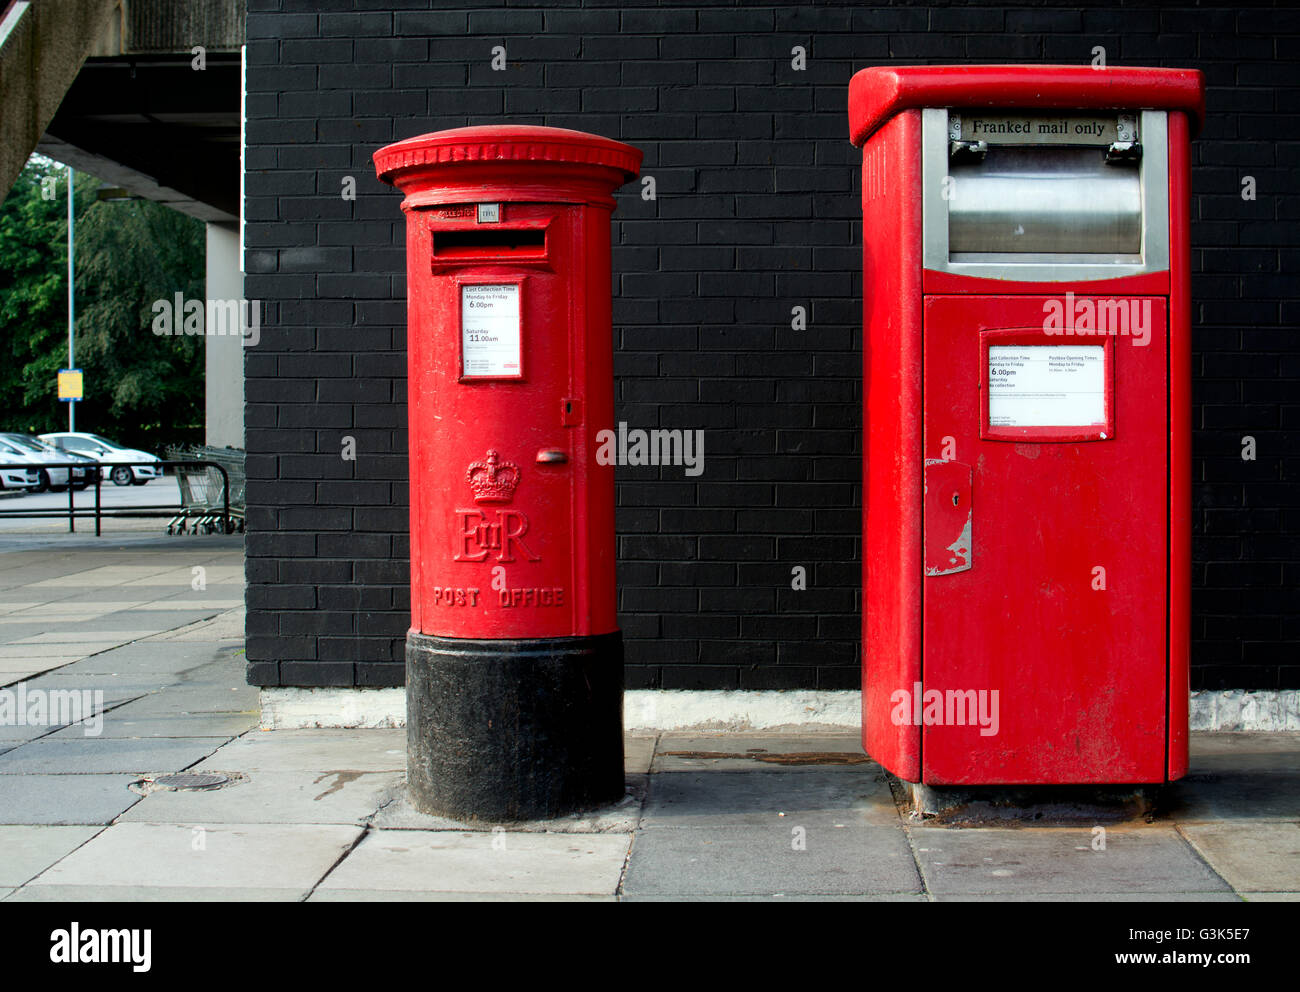 Mail boxes at the Concourse Shopping Centre, Skelmersdale, Lancashire, England, UK Stock Photo